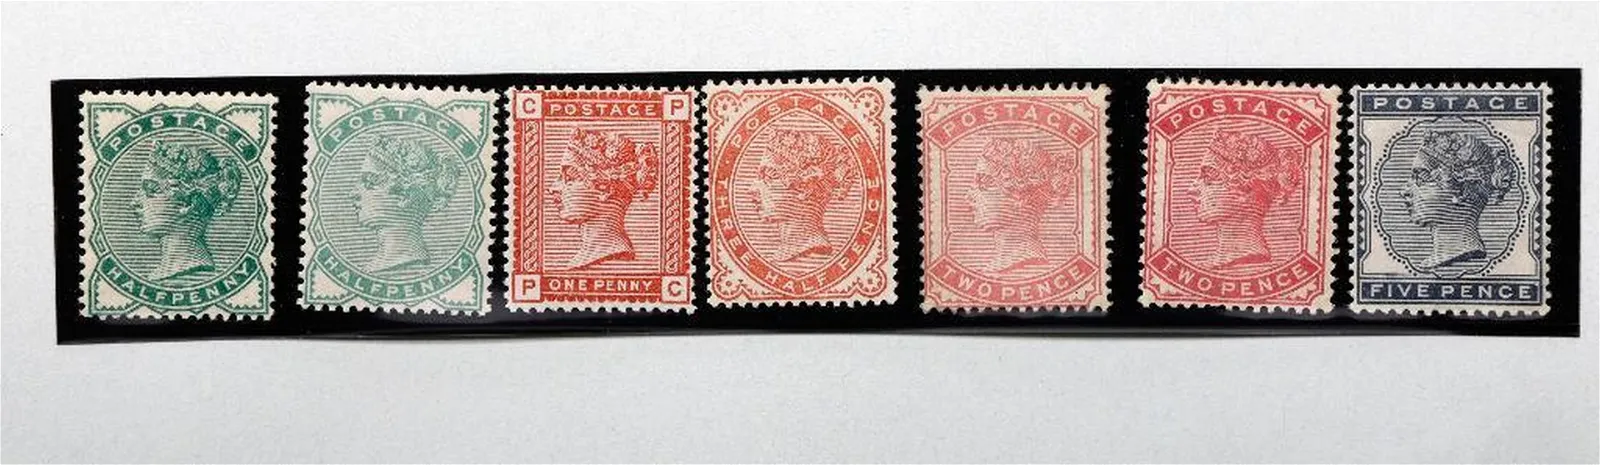 A group of red stamps

Description automatically generated